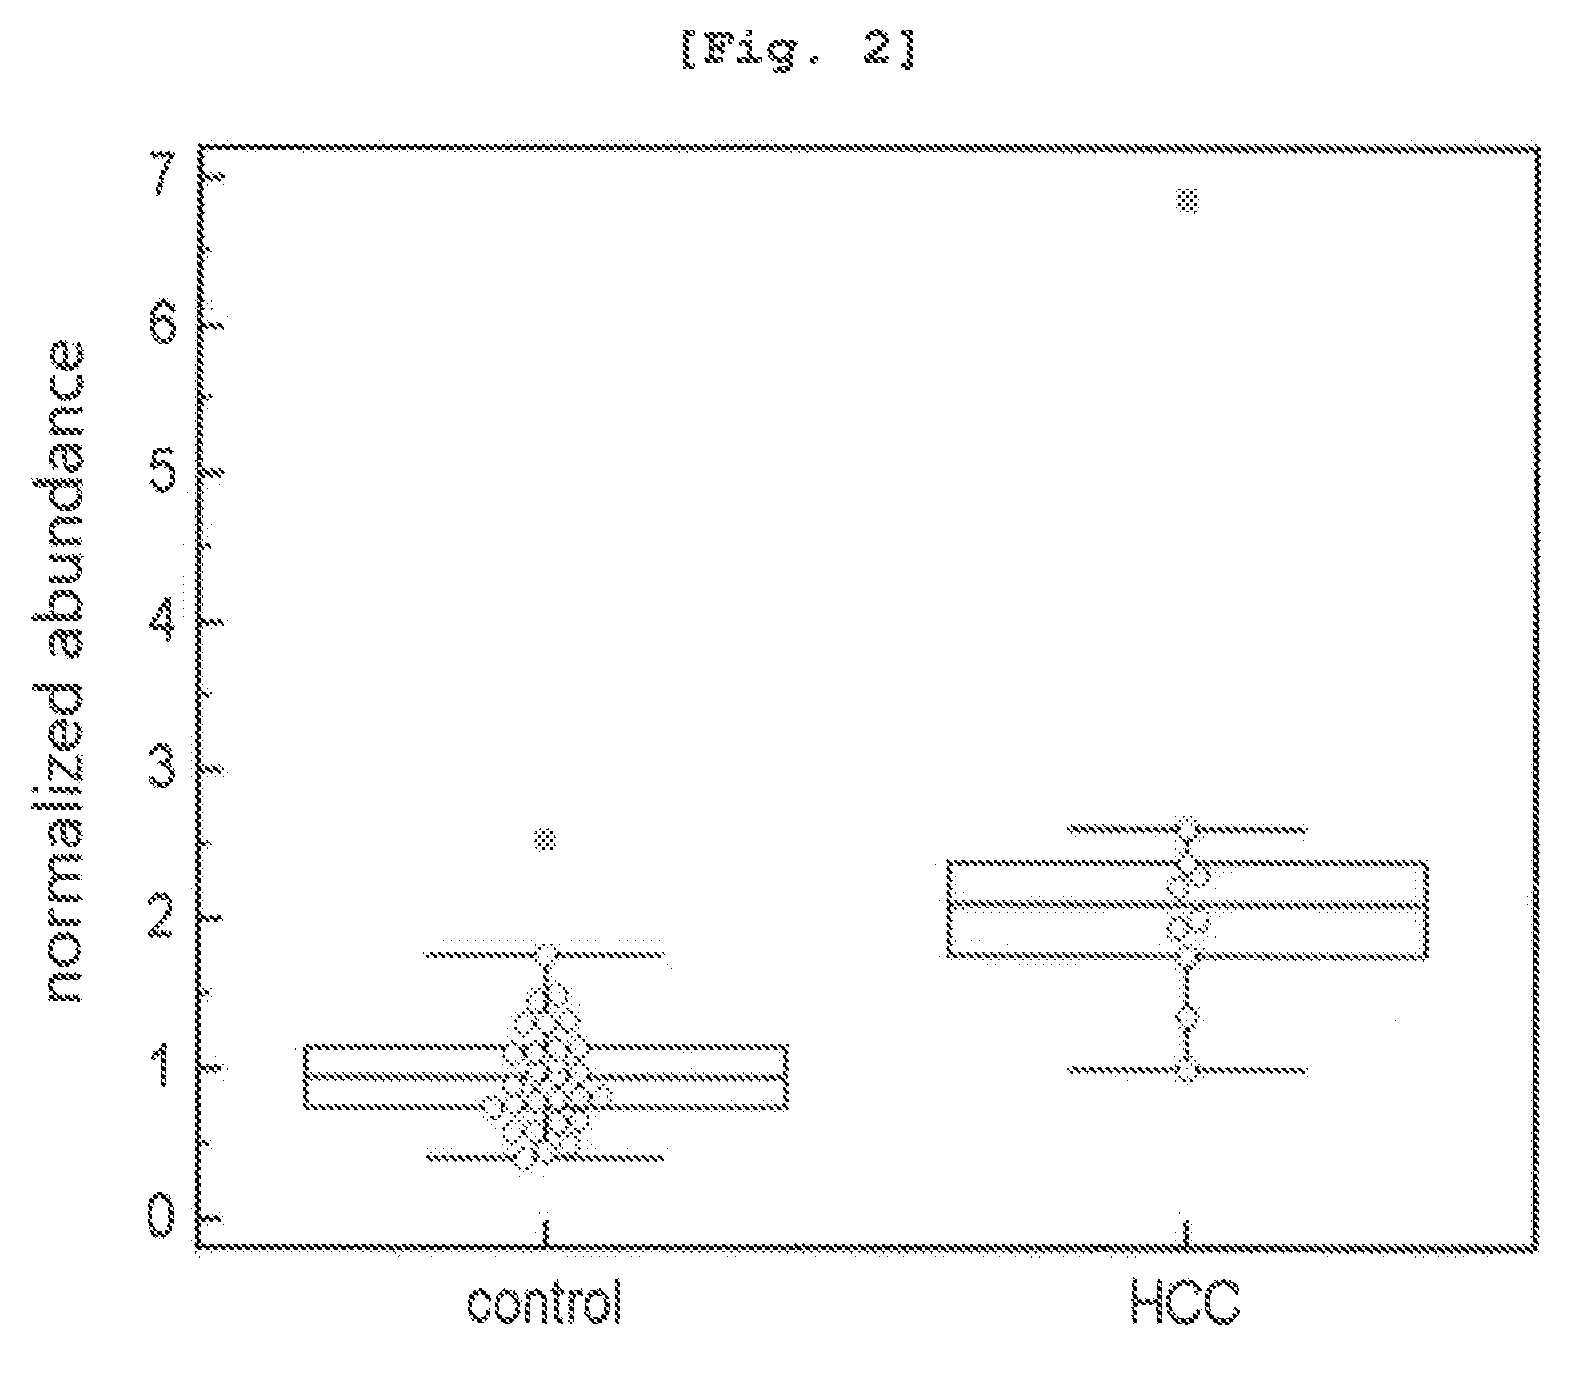 Polypeptide markers for the diagnosis of cancers, and methods for the diagnosis of cancers using the same